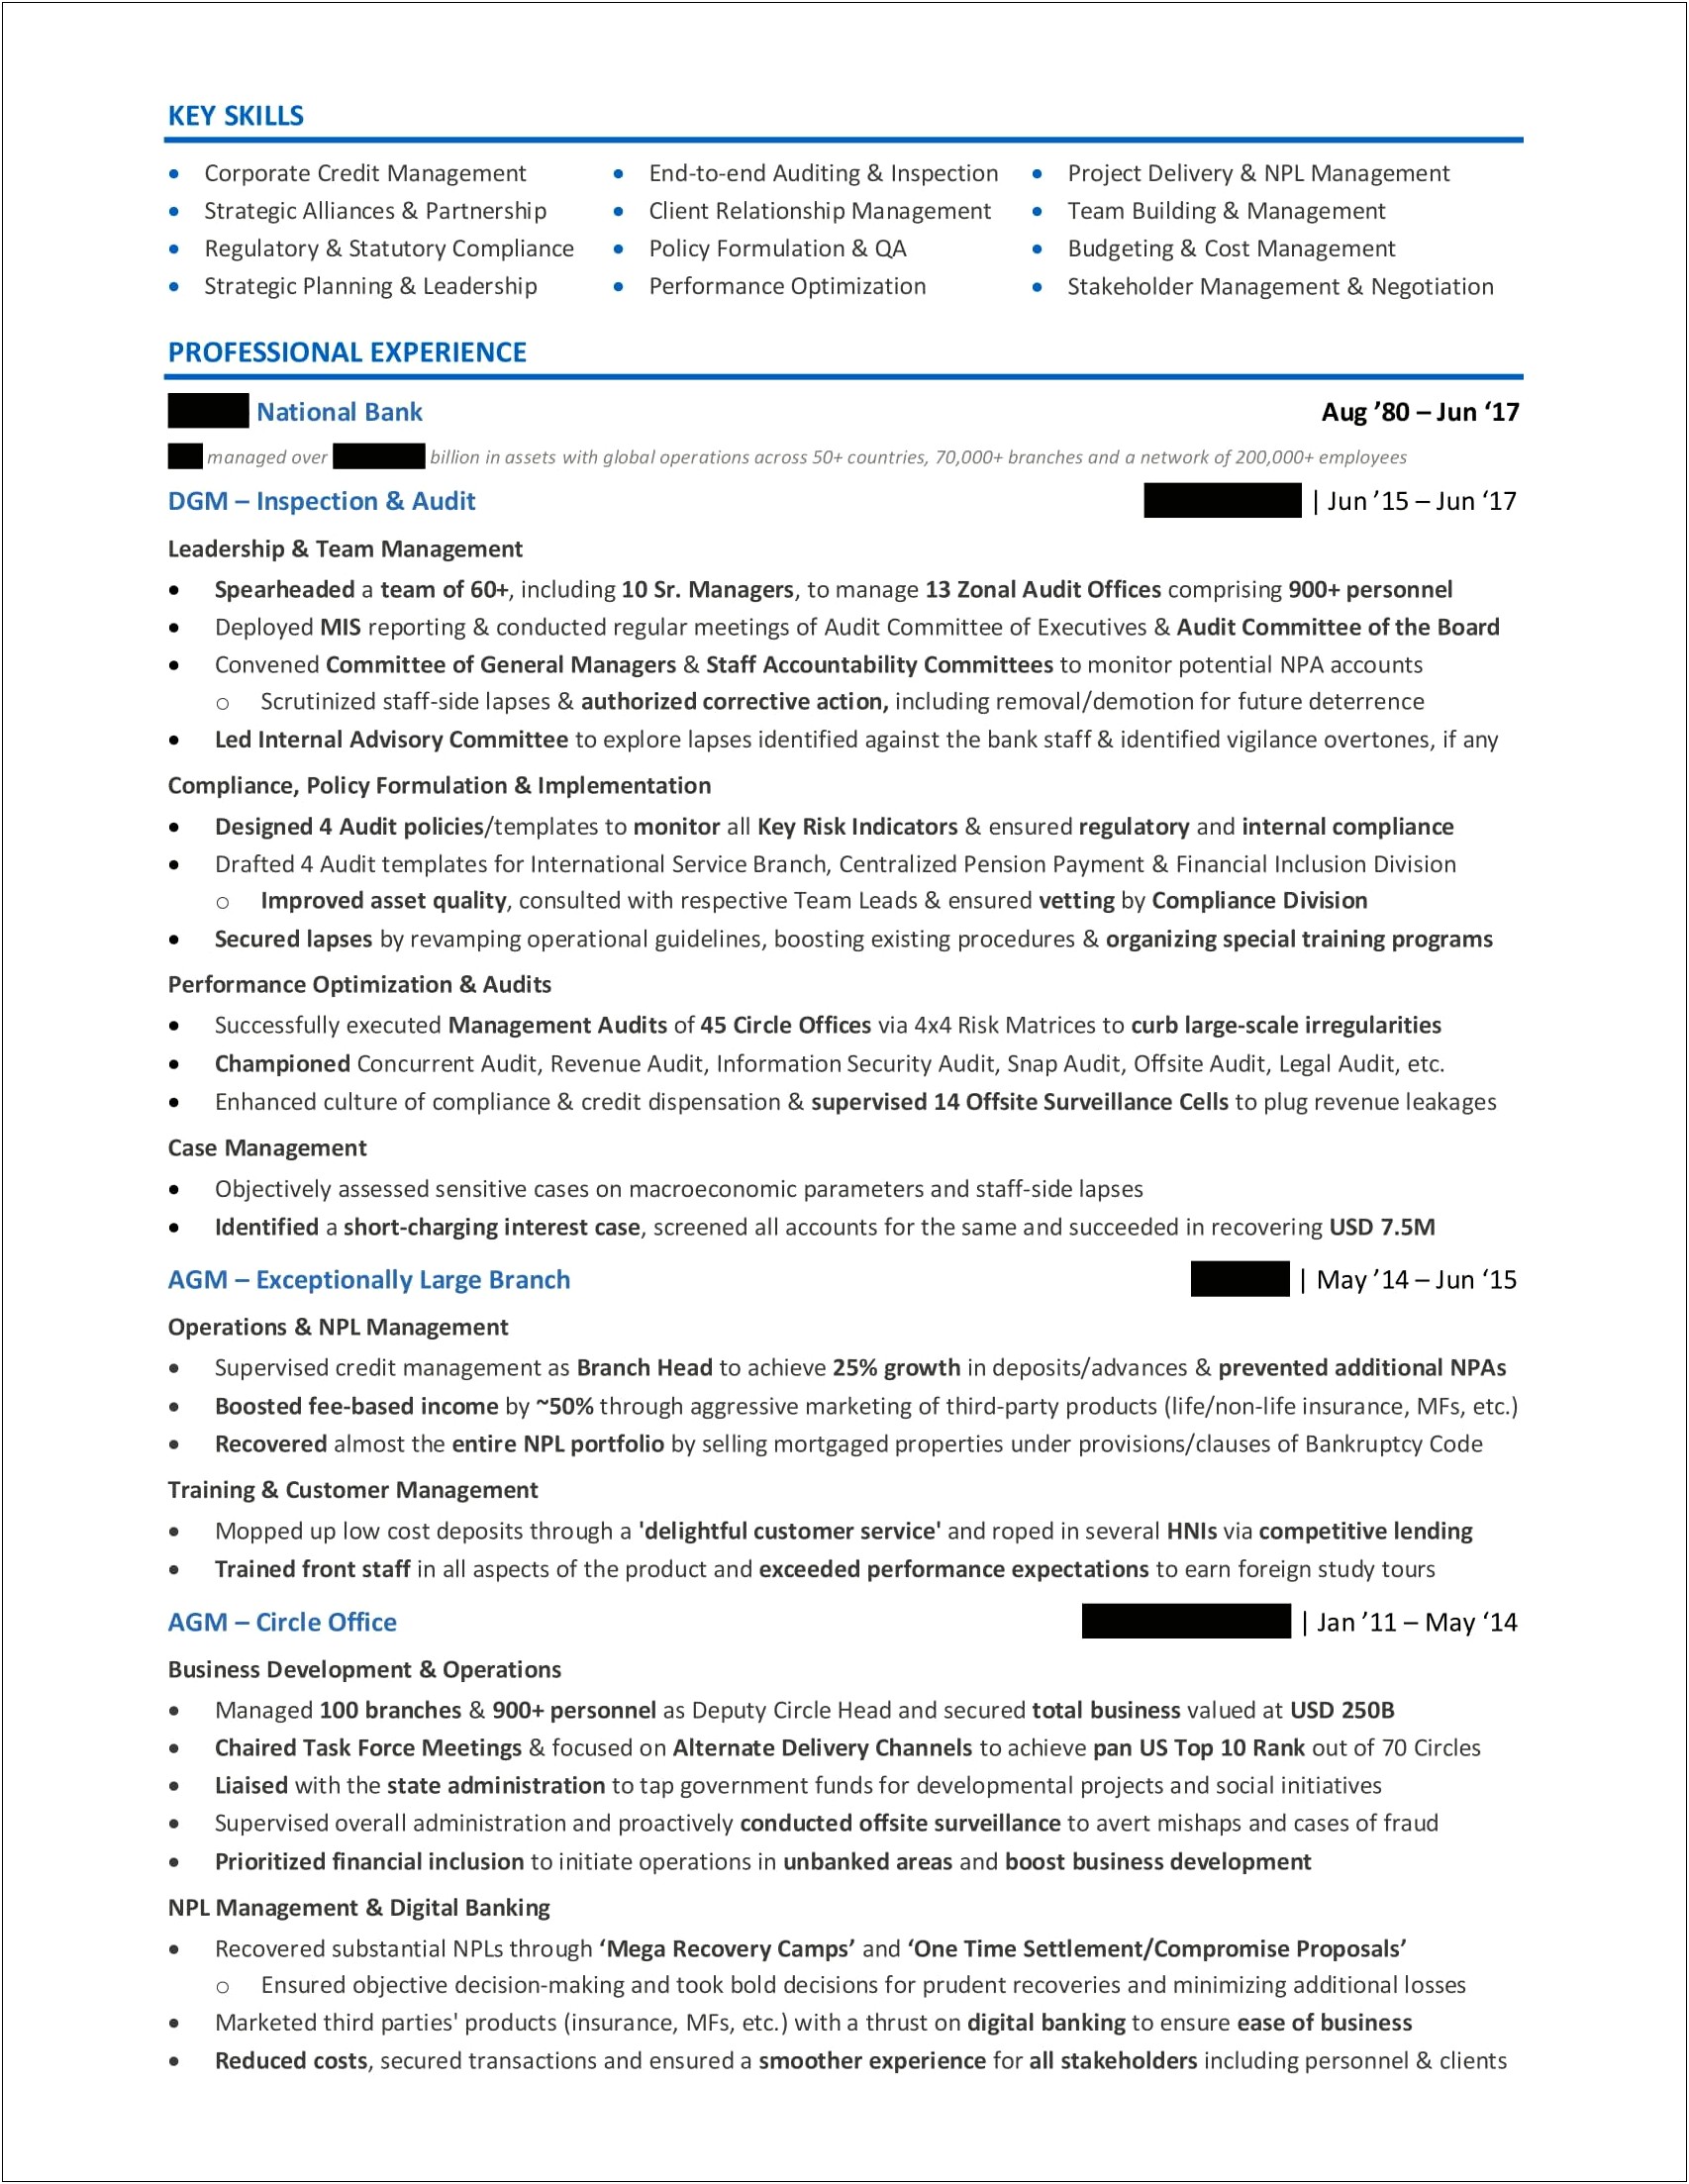 Key Skills To Be Mentioned In Resume